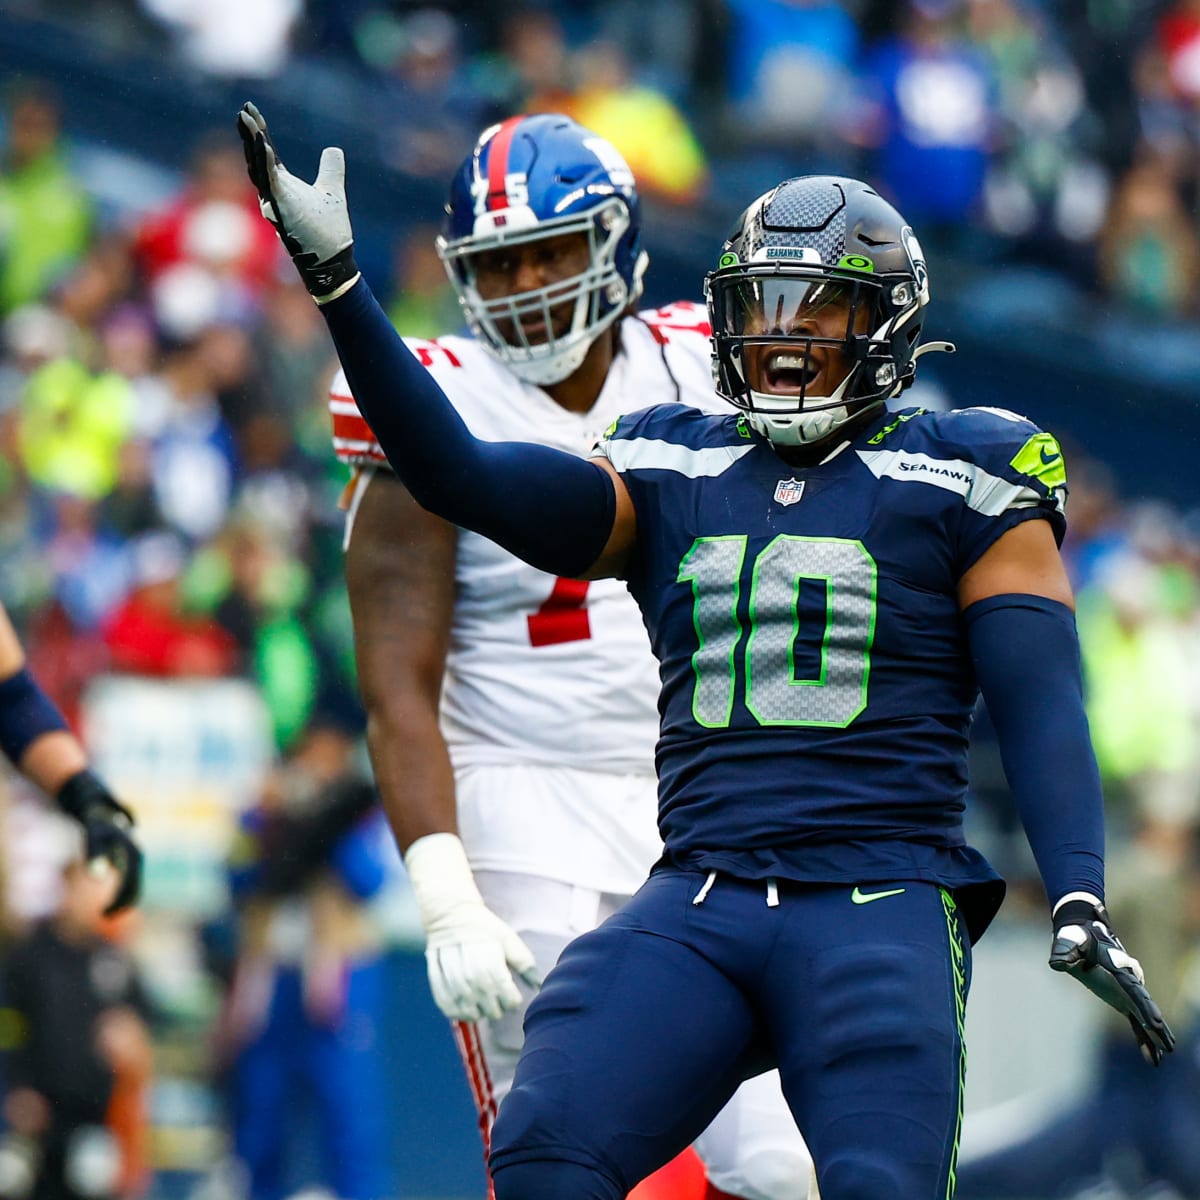 Seahawks position overview: D-line upgrade likely priority